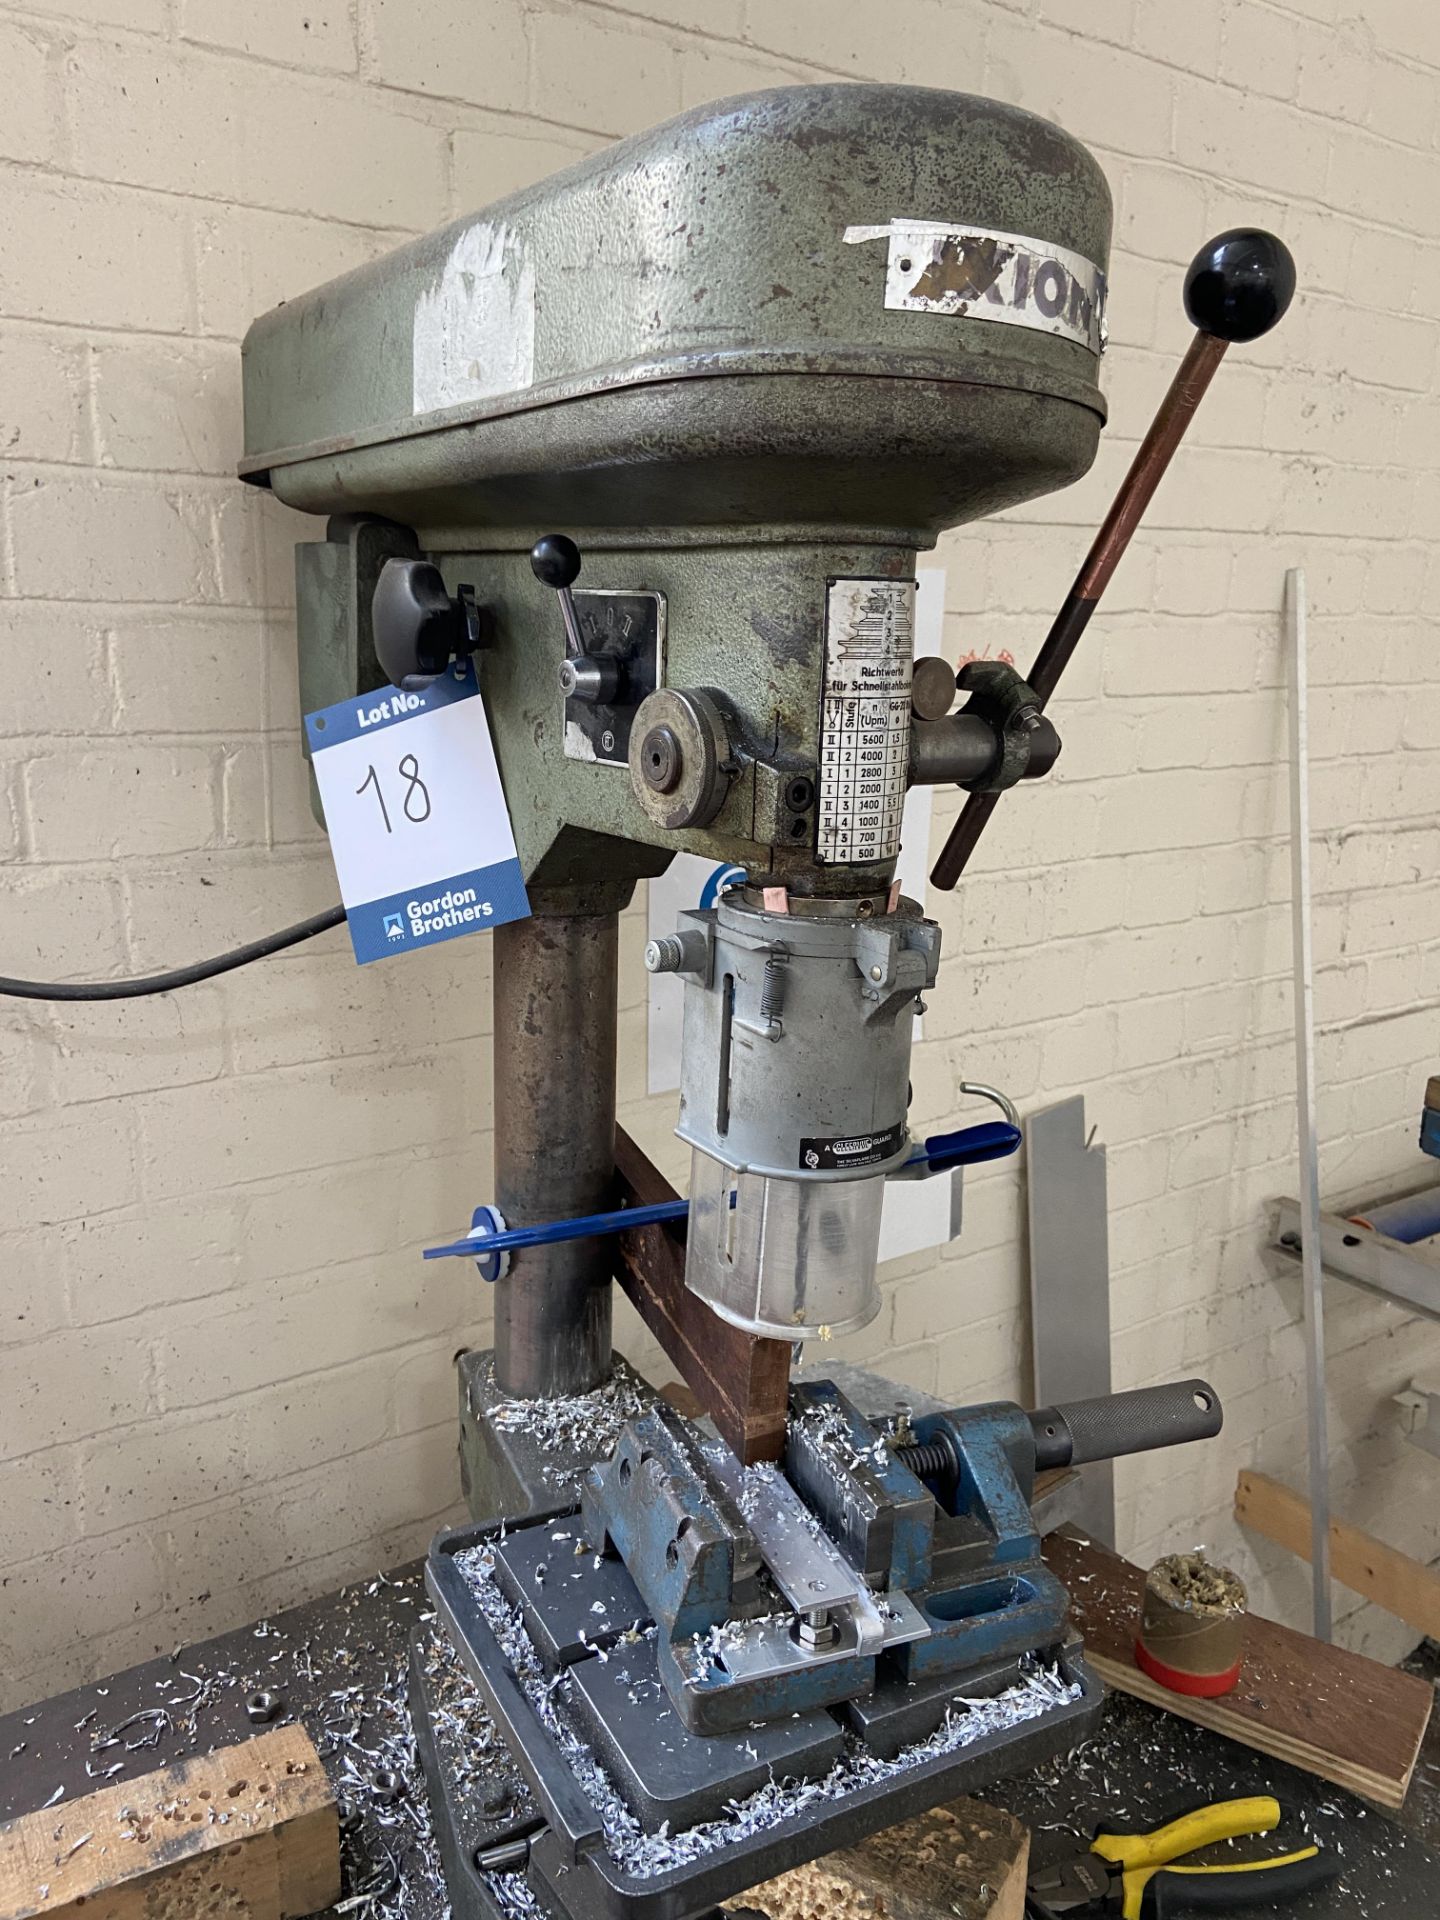 Axion pedestal drill press, Model: BST13, Serial No: 44043 (1974) with machine vice